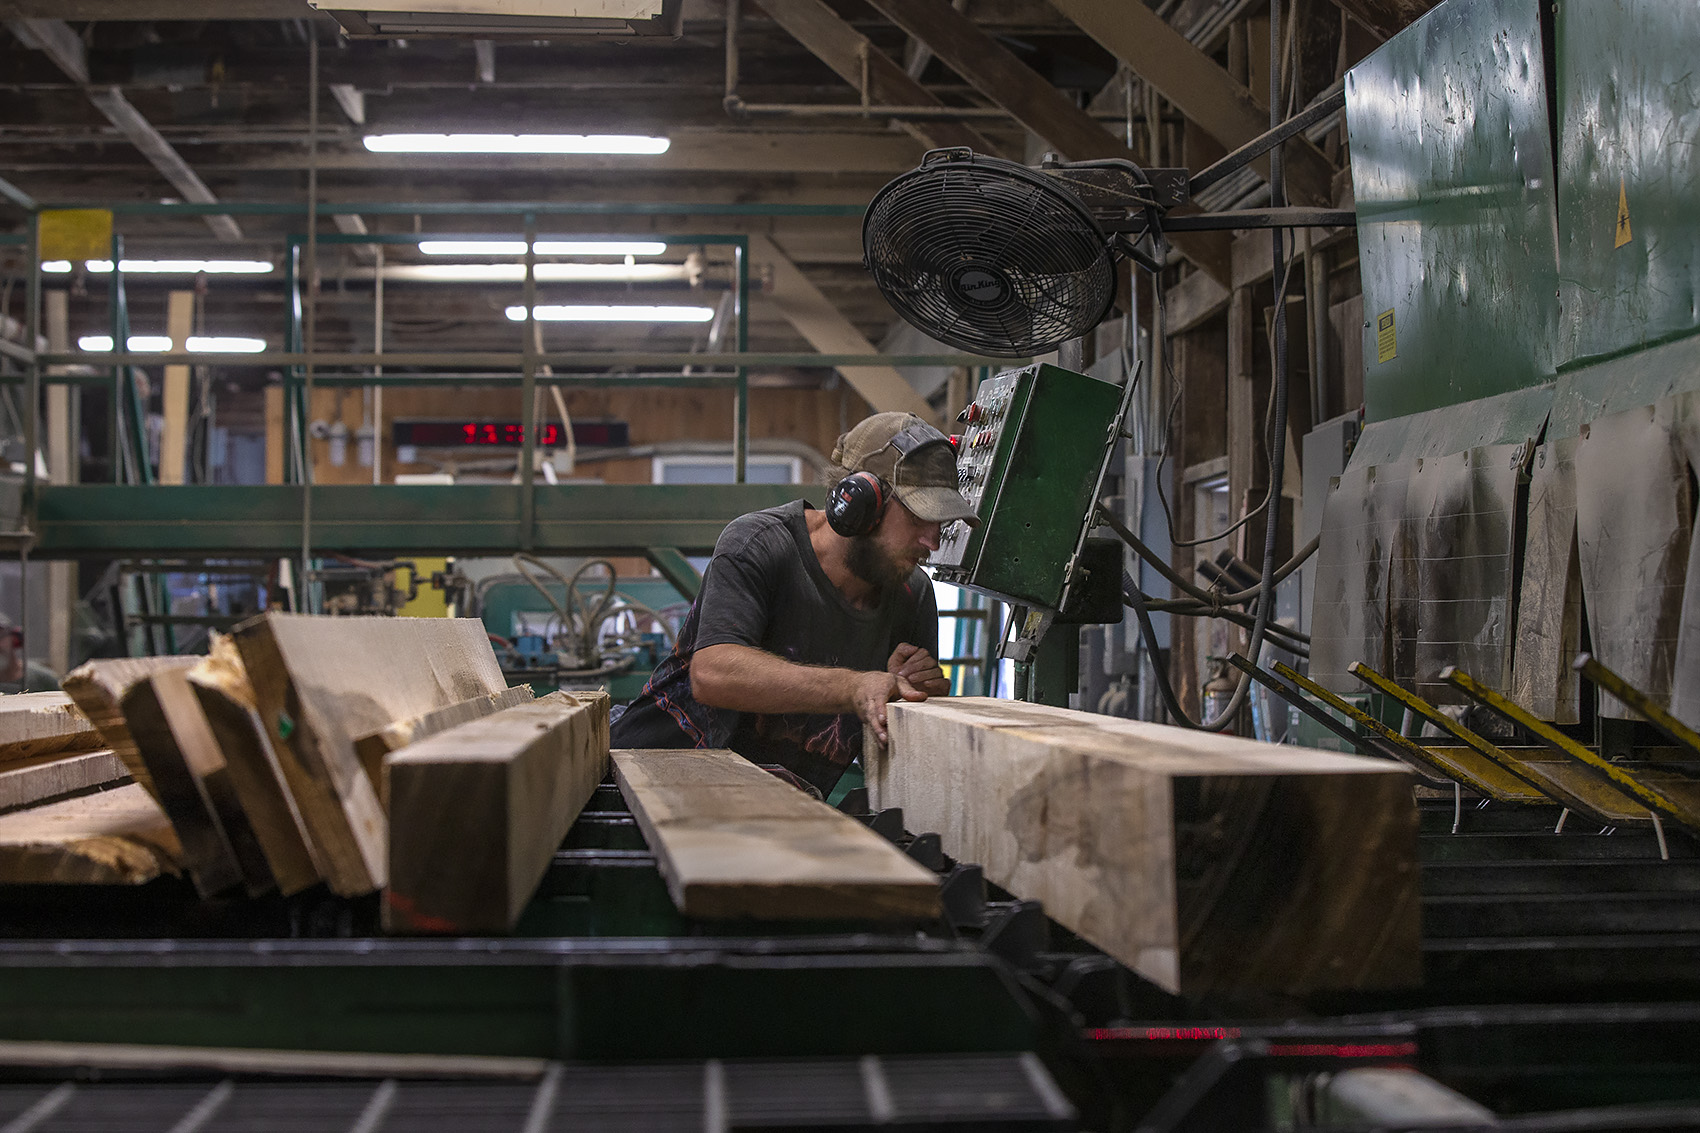 An employee inspects oak boards before they are sorted at Allard Lumber in Brattleboro, Vermont. (Jesse Costa/WBUR)